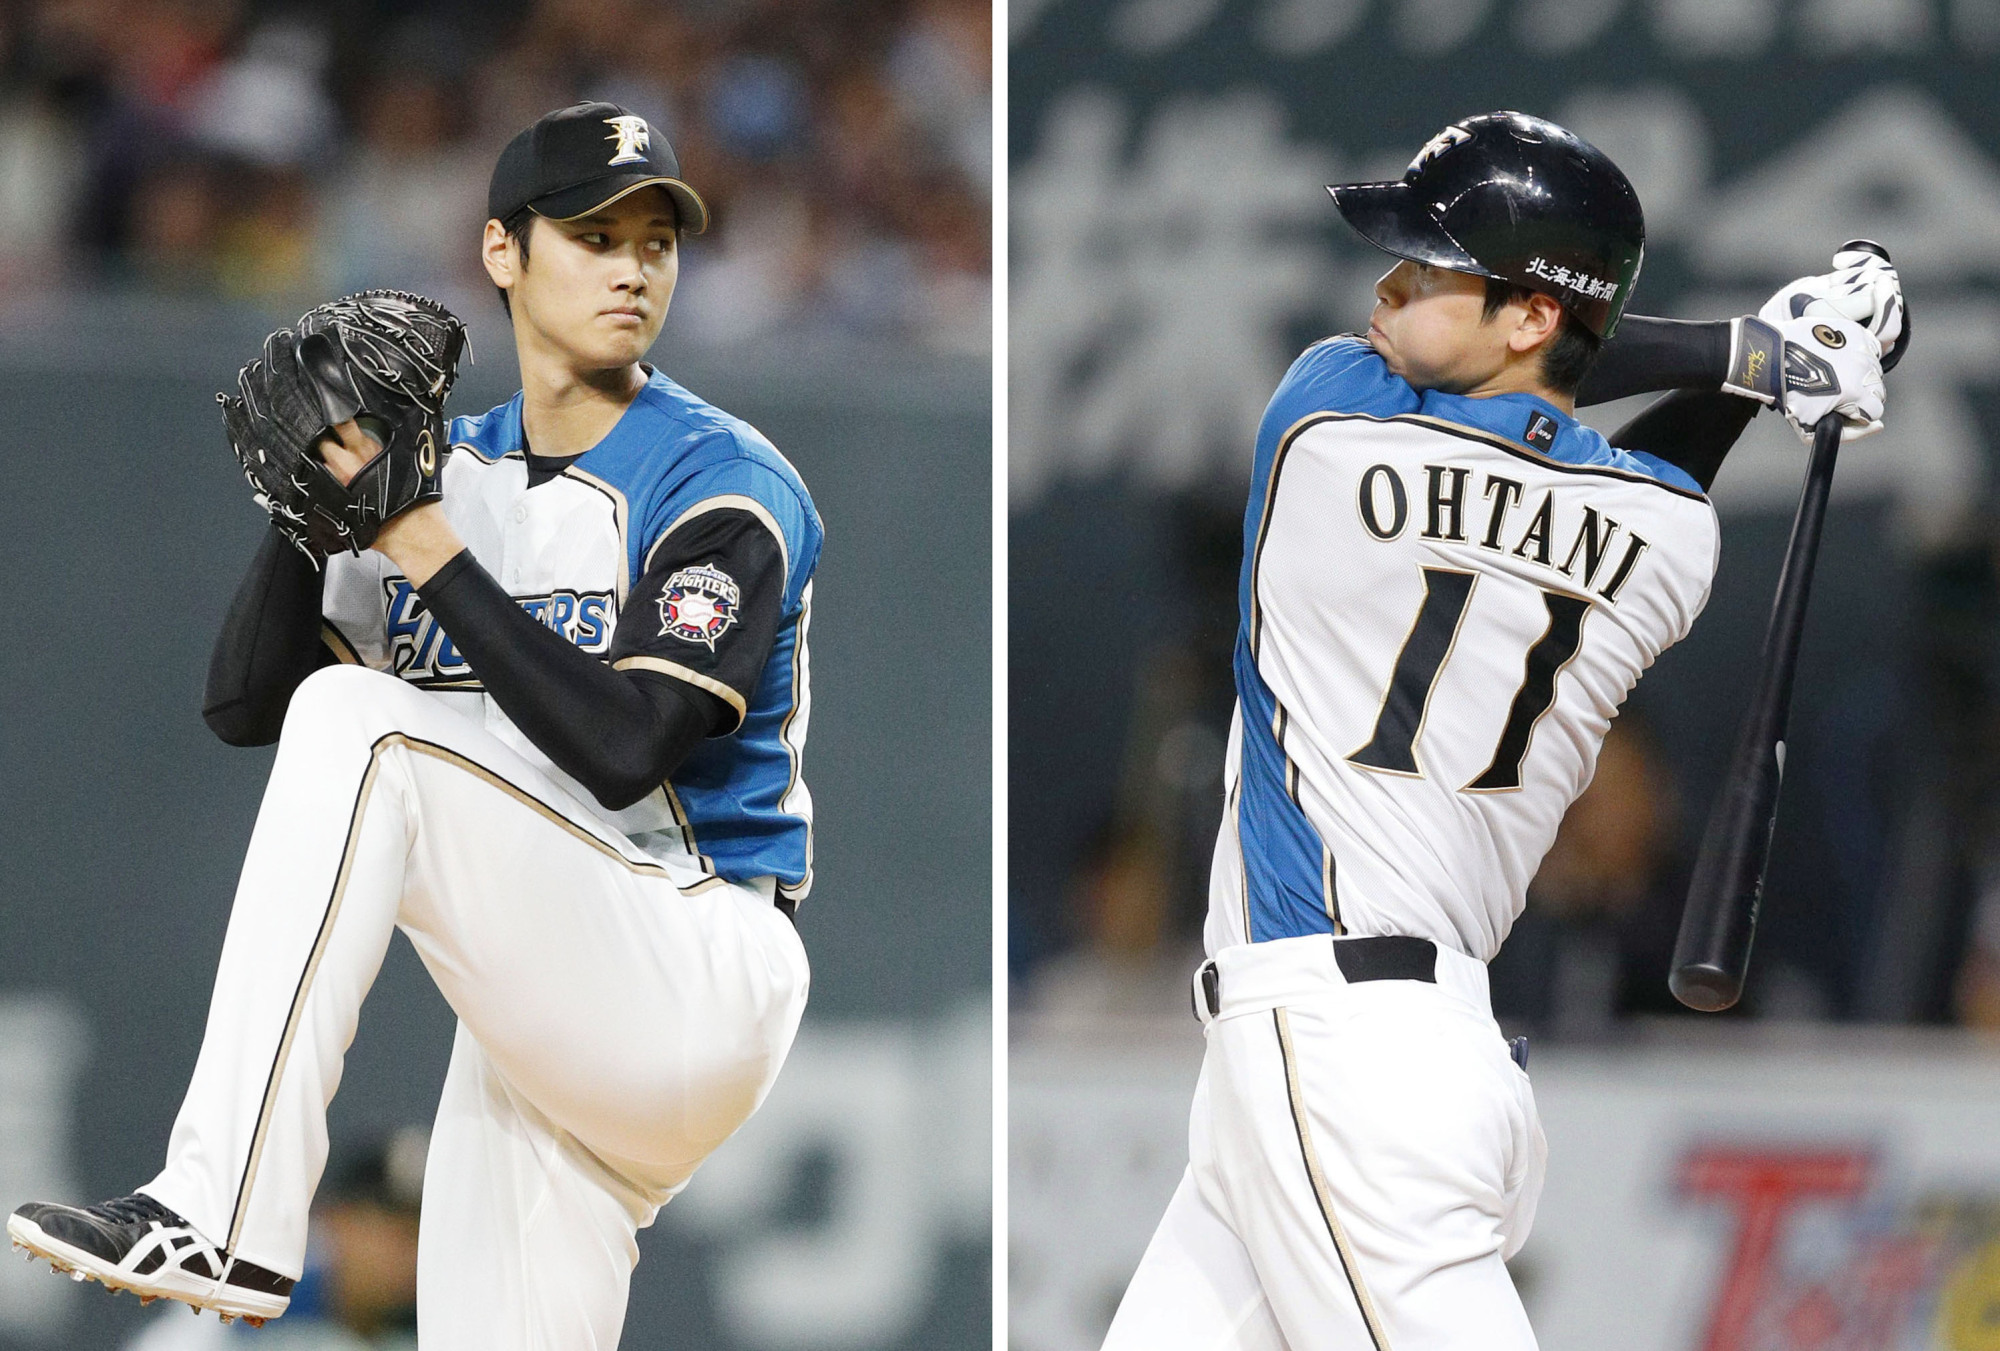 Shohei Otani speaks of desire to become world's best with move to